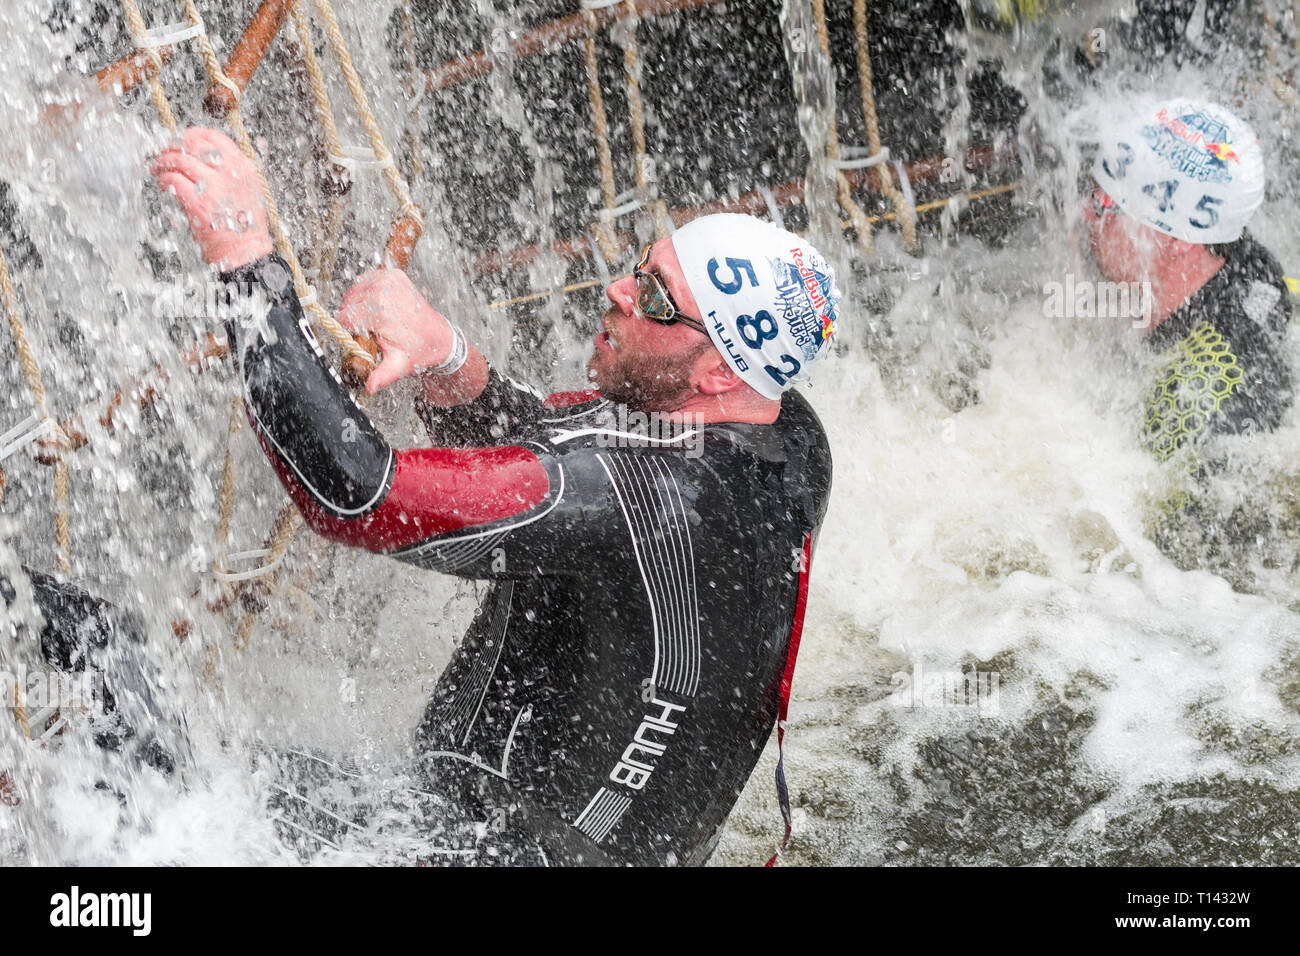 Maryhill, Glasgow, Scotland, UK. 23rd Mar, 2019. UK weather - a determined competitor braving 8 degree water temperatures at the Red Bull Neptune Steps swim/climb adventure endurance race at Maryhill Locks, Glasgow. The annual extreme event involves swimming 400m of cold canal water and climbing 18 metres over 7 canal lock gate obstacles Credit: Kay Roxby/Alamy Live News Stock Photo